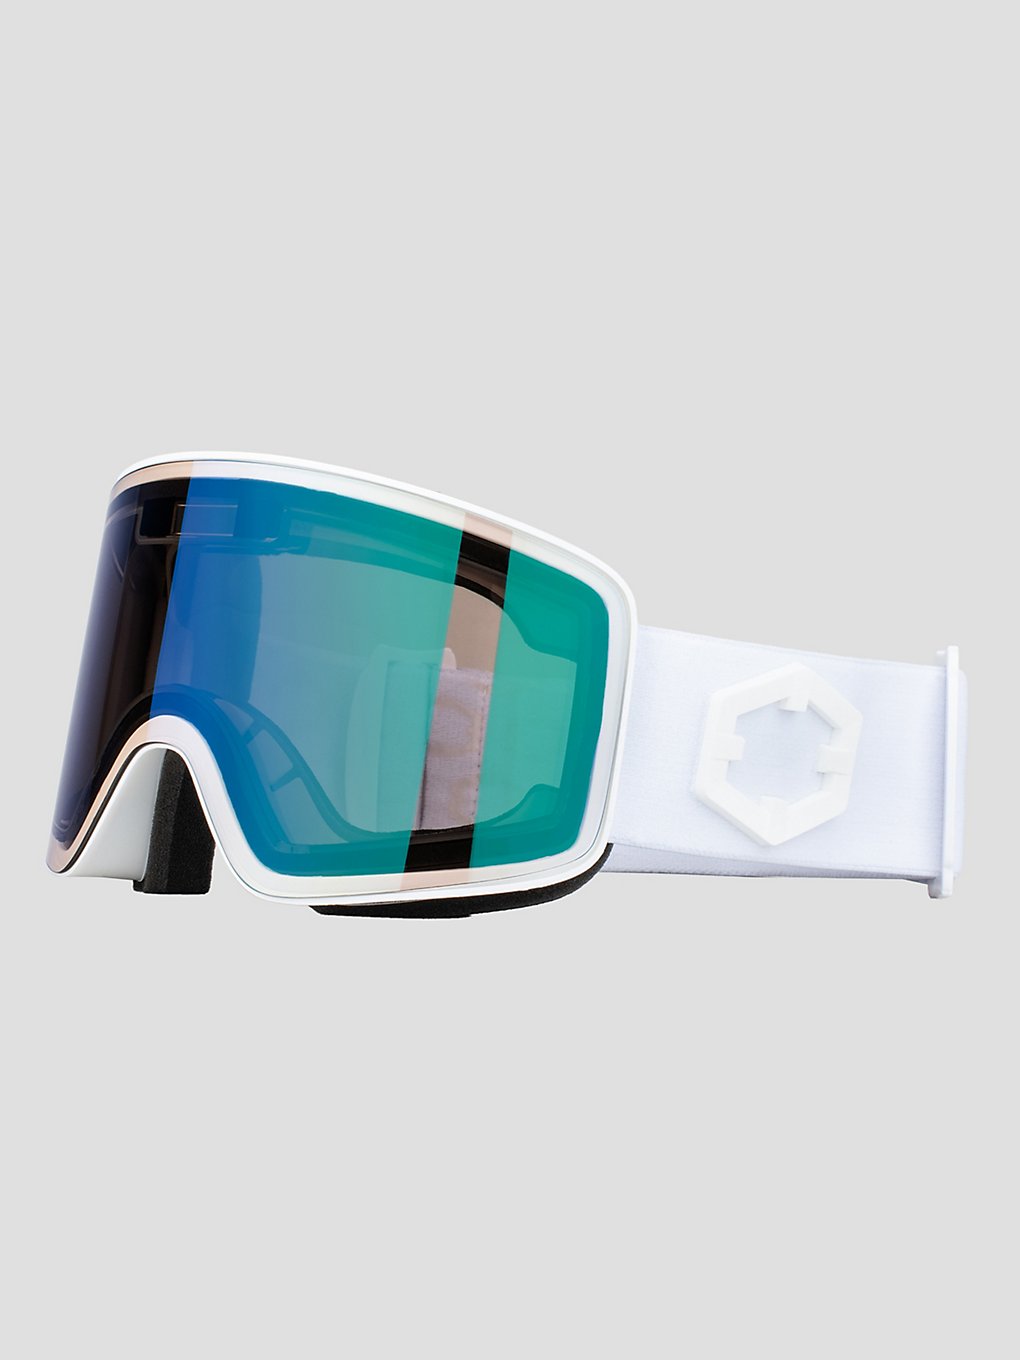 Out Of Electra 2 White Goggle irid green kaufen